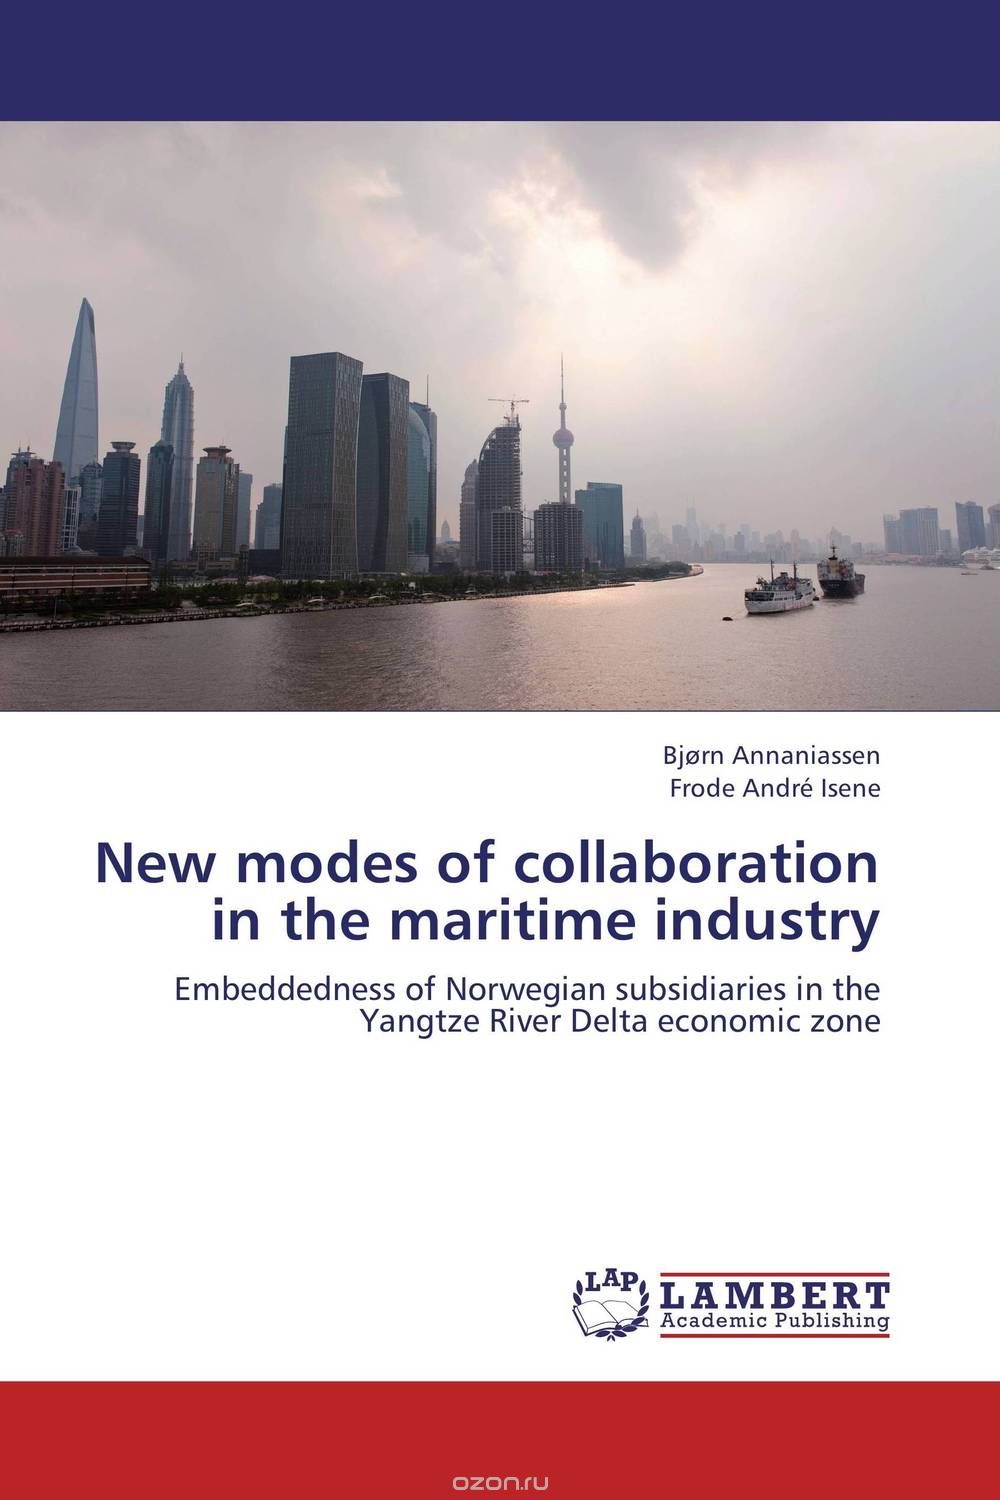 New modes of collaboration in the maritime industry